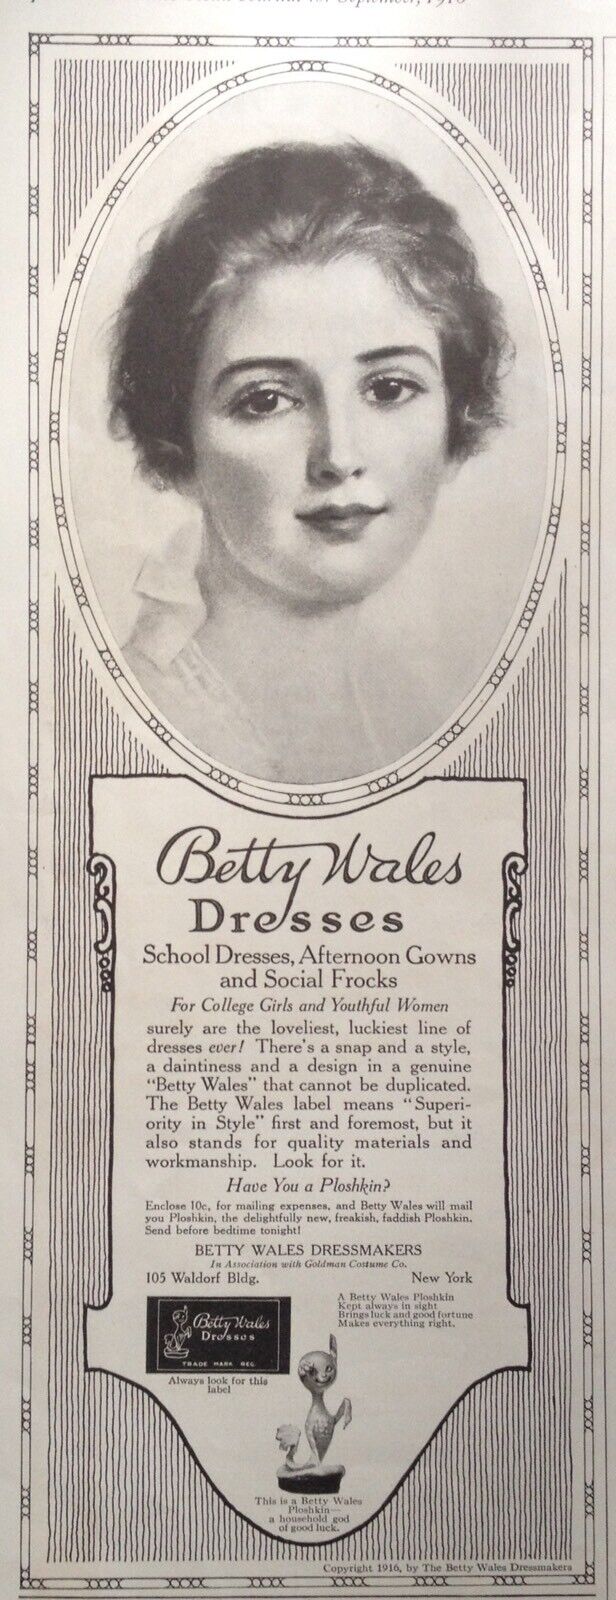 1916 AD(K15)~BETTY WALES DRESSMAKERS NYC. DRESSES, GOWNS FOR YOUTHFUL WOMEN